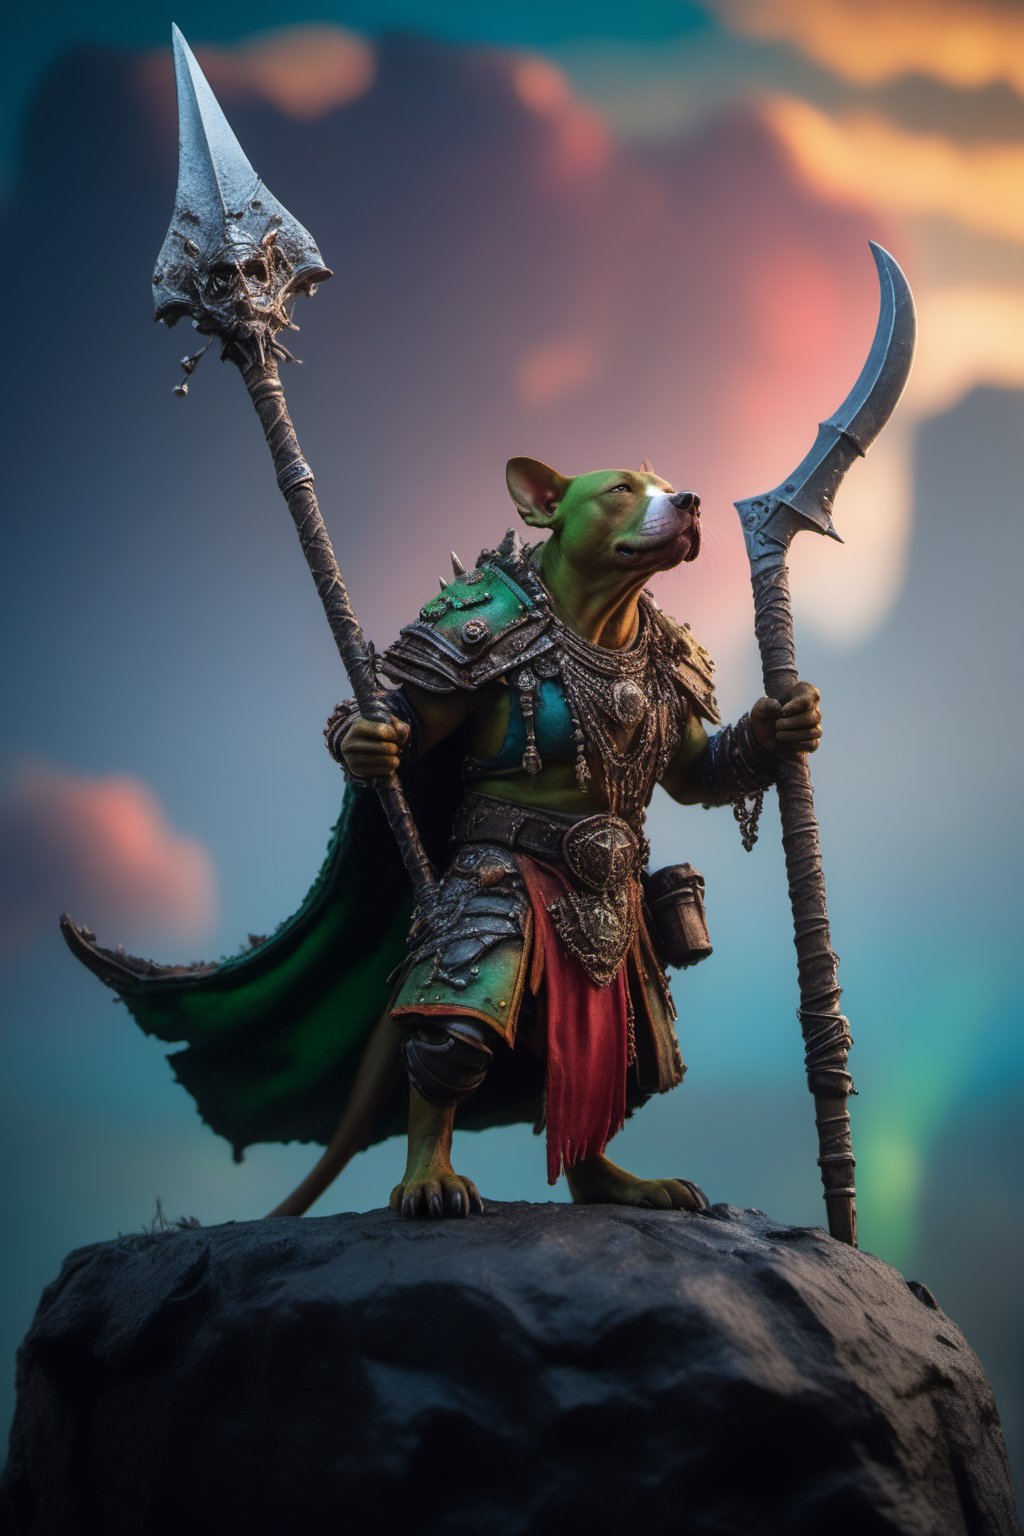 an awarded photography of Tretch Craventail - A devious Skaven chieftain with a long, pitbull and clad in tattered robes. A stunning arch of colors across the sky, created by the dispersion of sunlight in raindrops. , masterpiece, ultrasharp, depth of field and boekh, best quality,